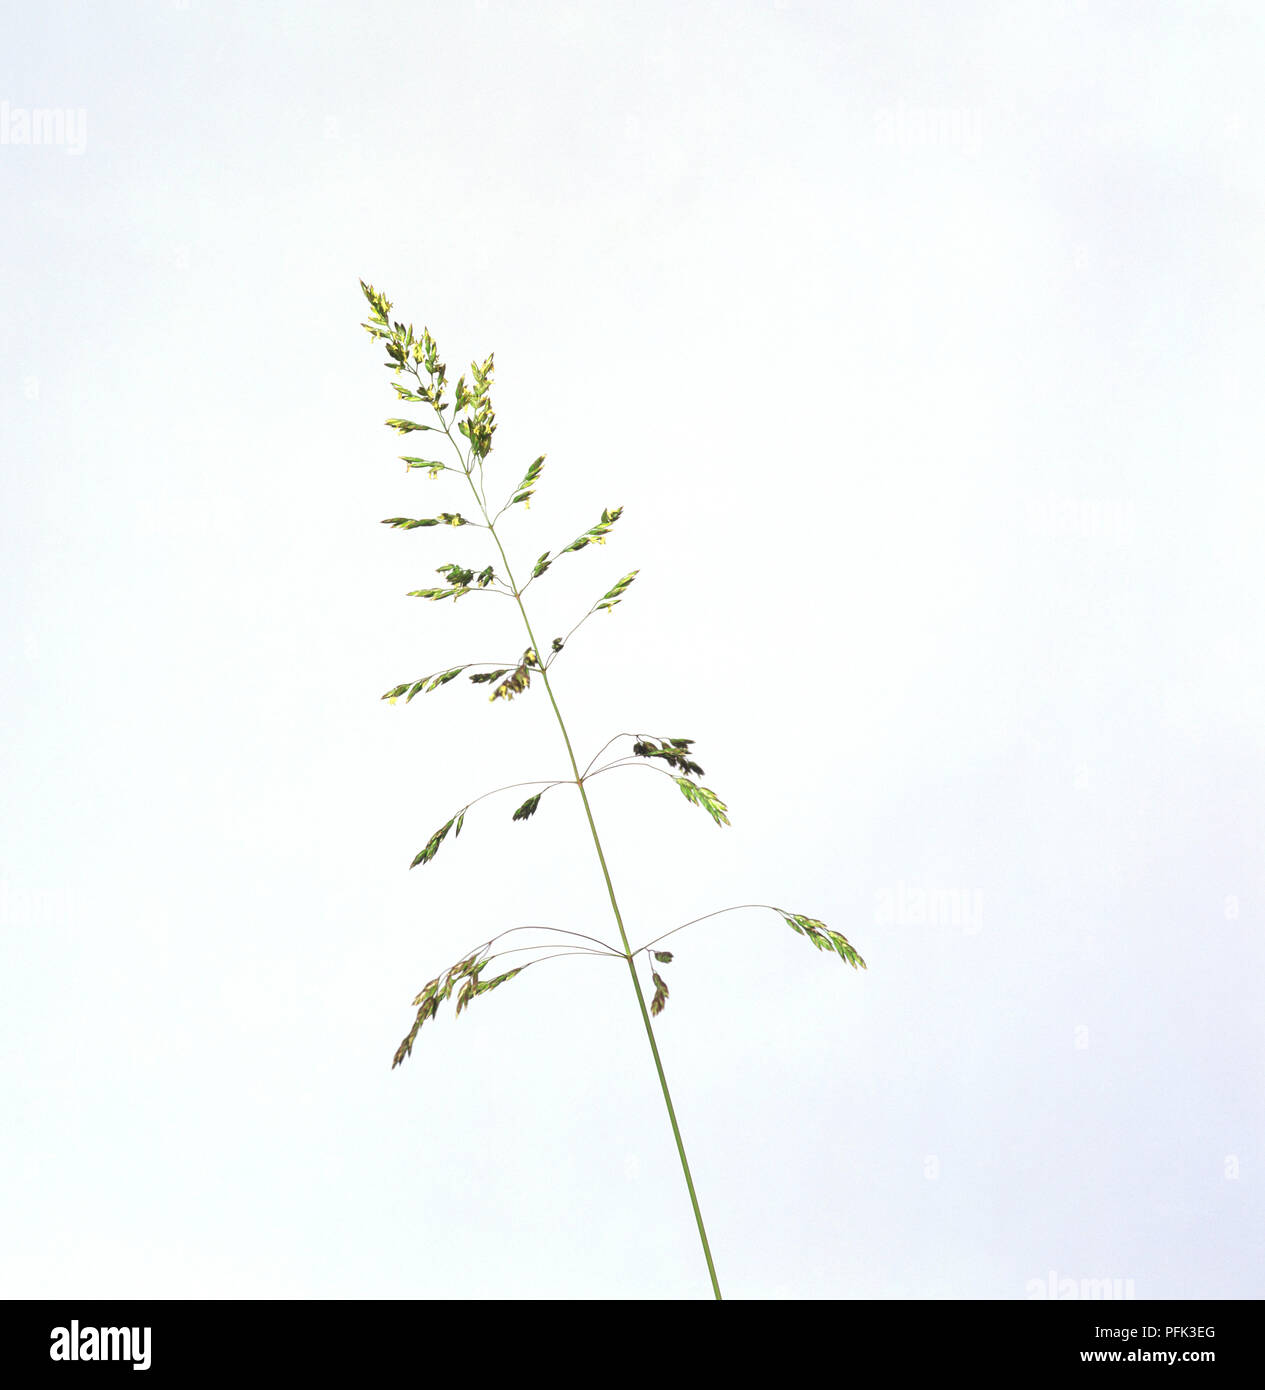 Stem from Poa palustris (Swamp meadow grass), close-up Stock Photo